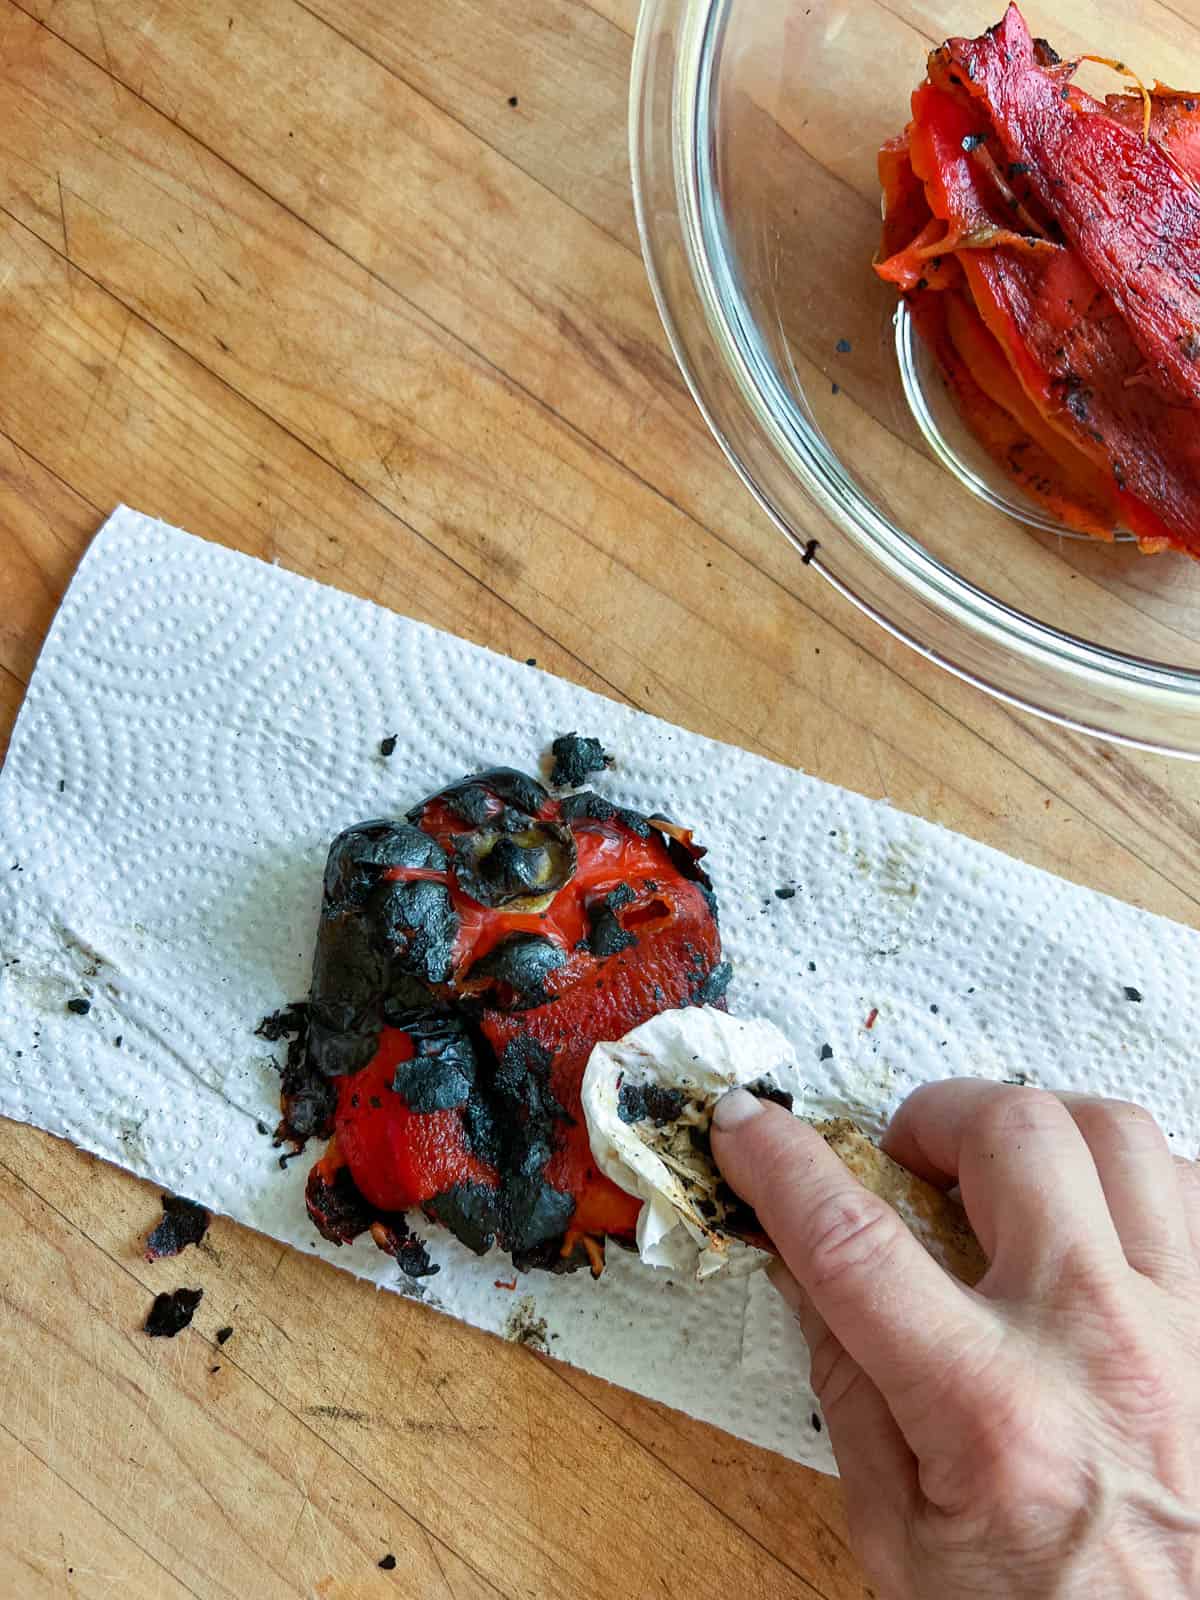 Wiping charred skin off of red pepper with a paper towel.